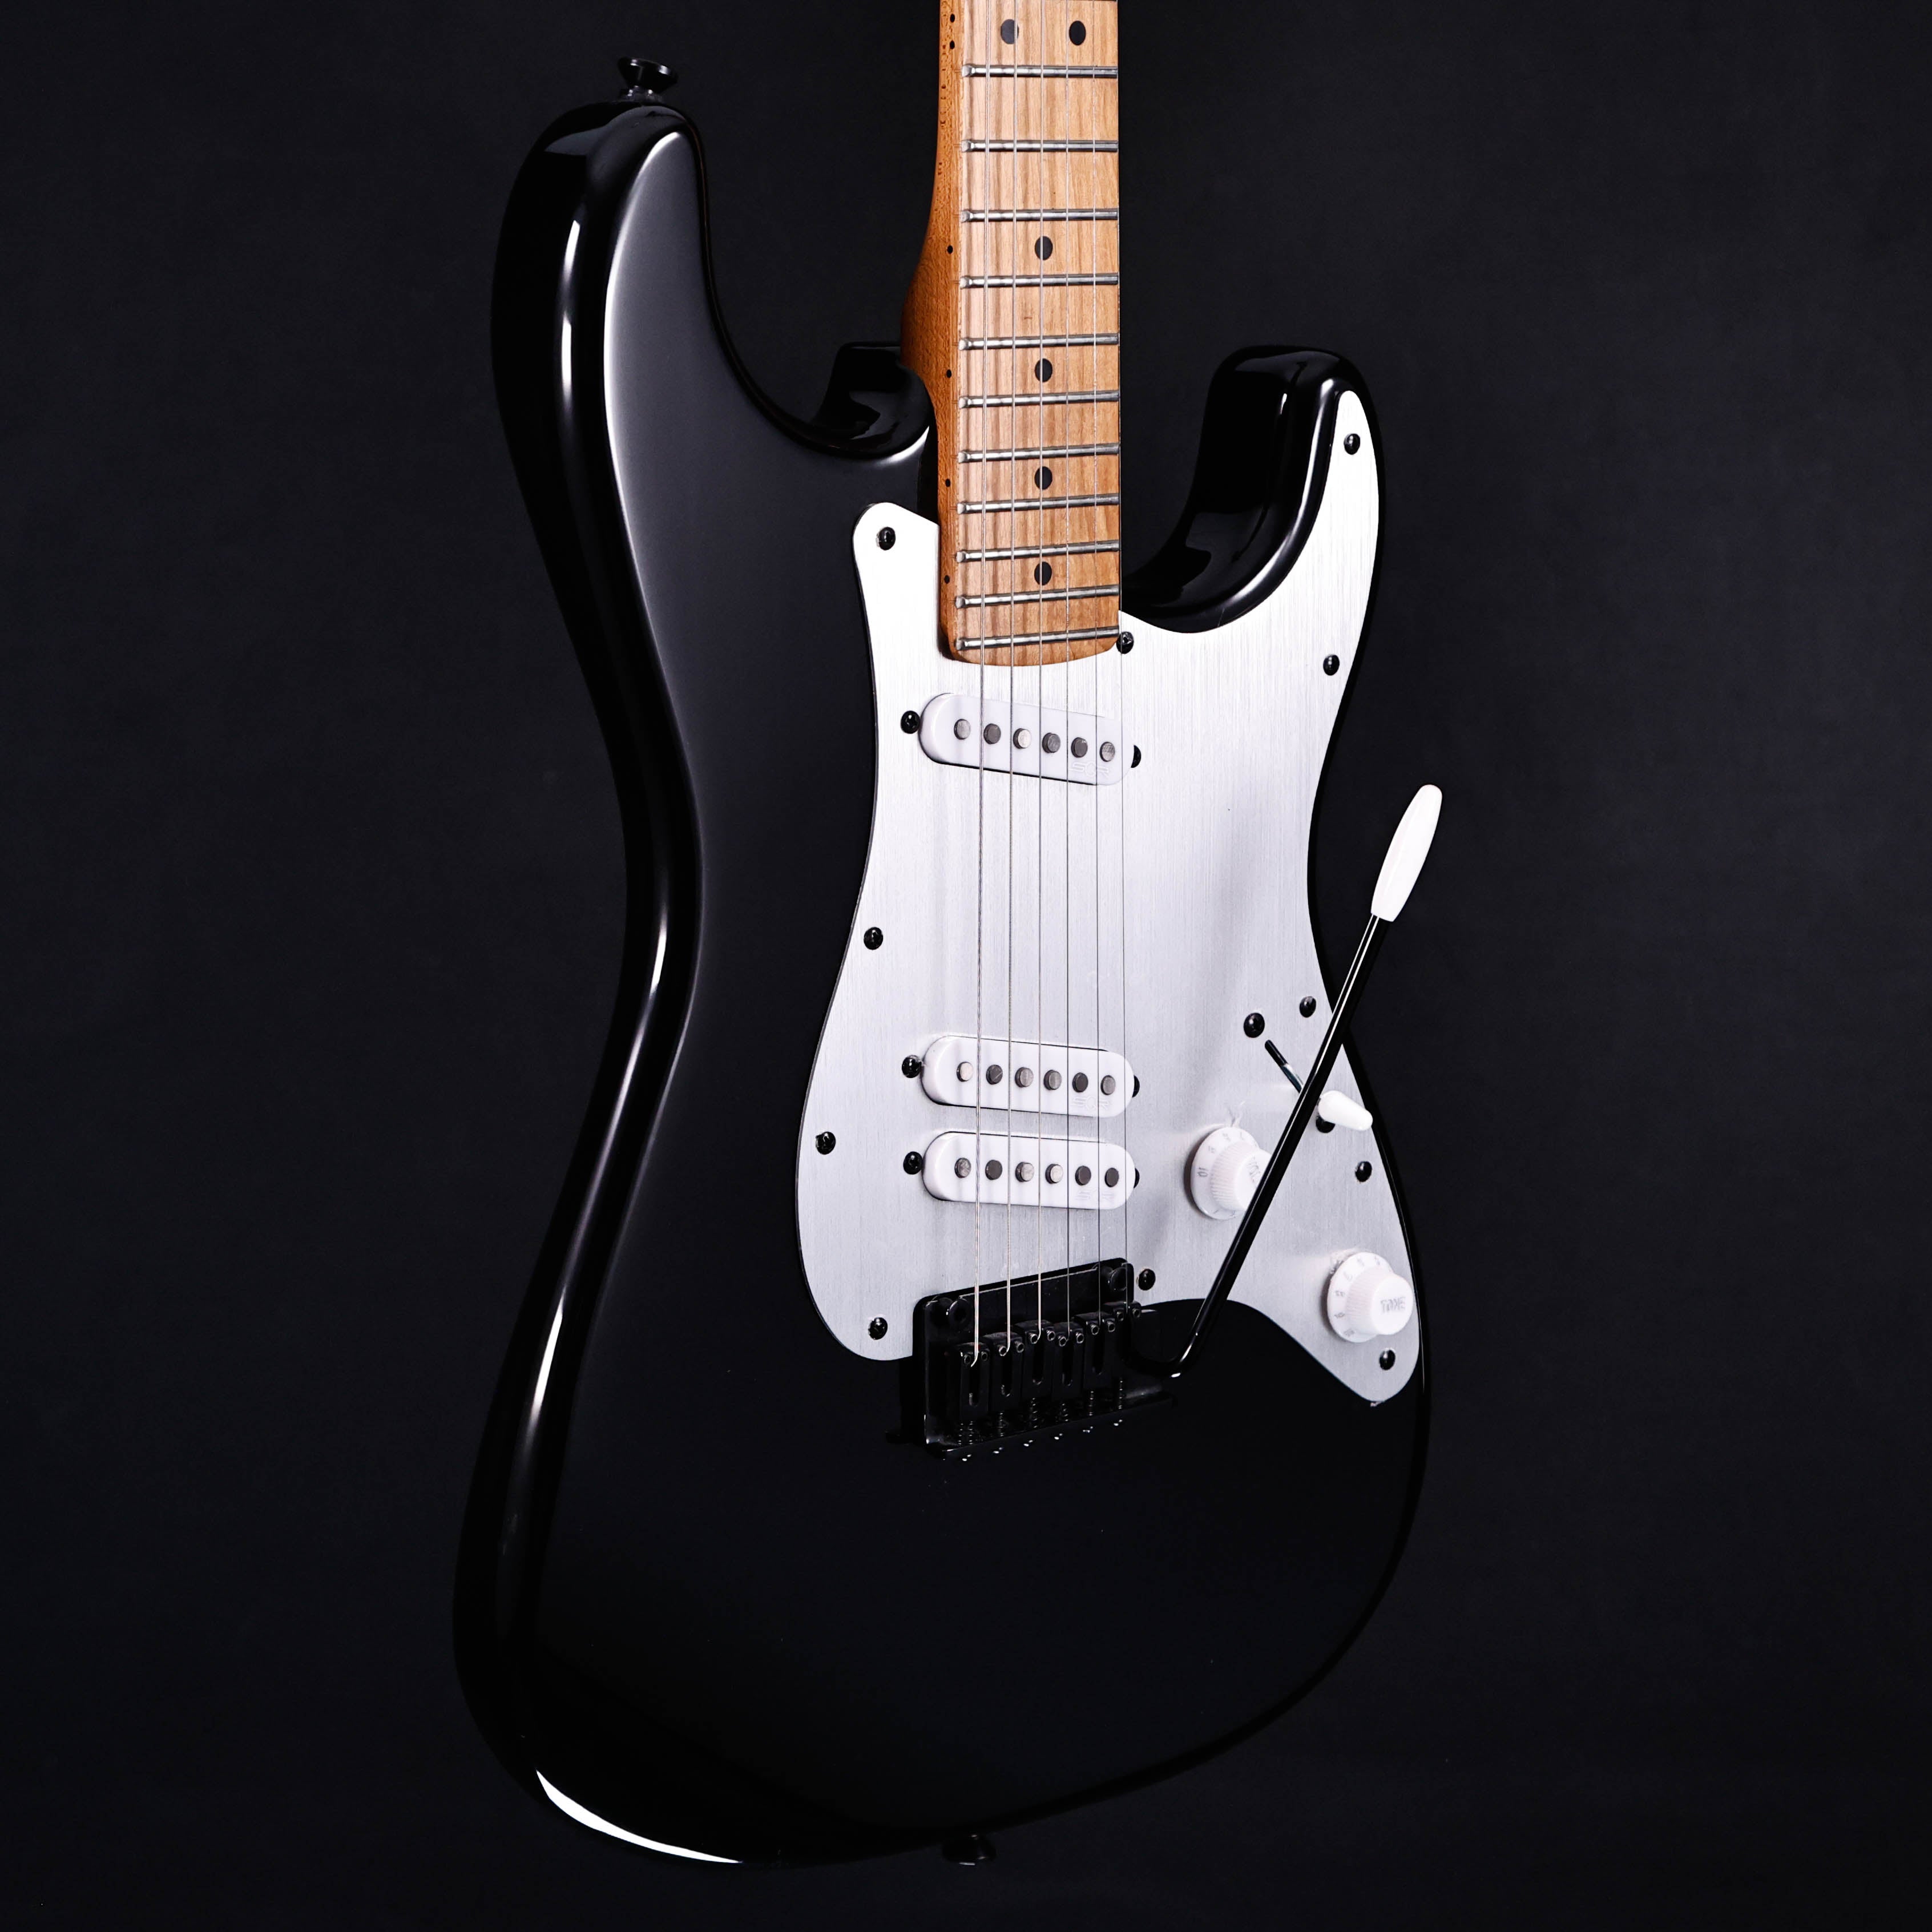 Squier Contemporary Stratocaster Spcl. Roasted Mp Fb,Silver guard,Black 8lbs 7.3oz